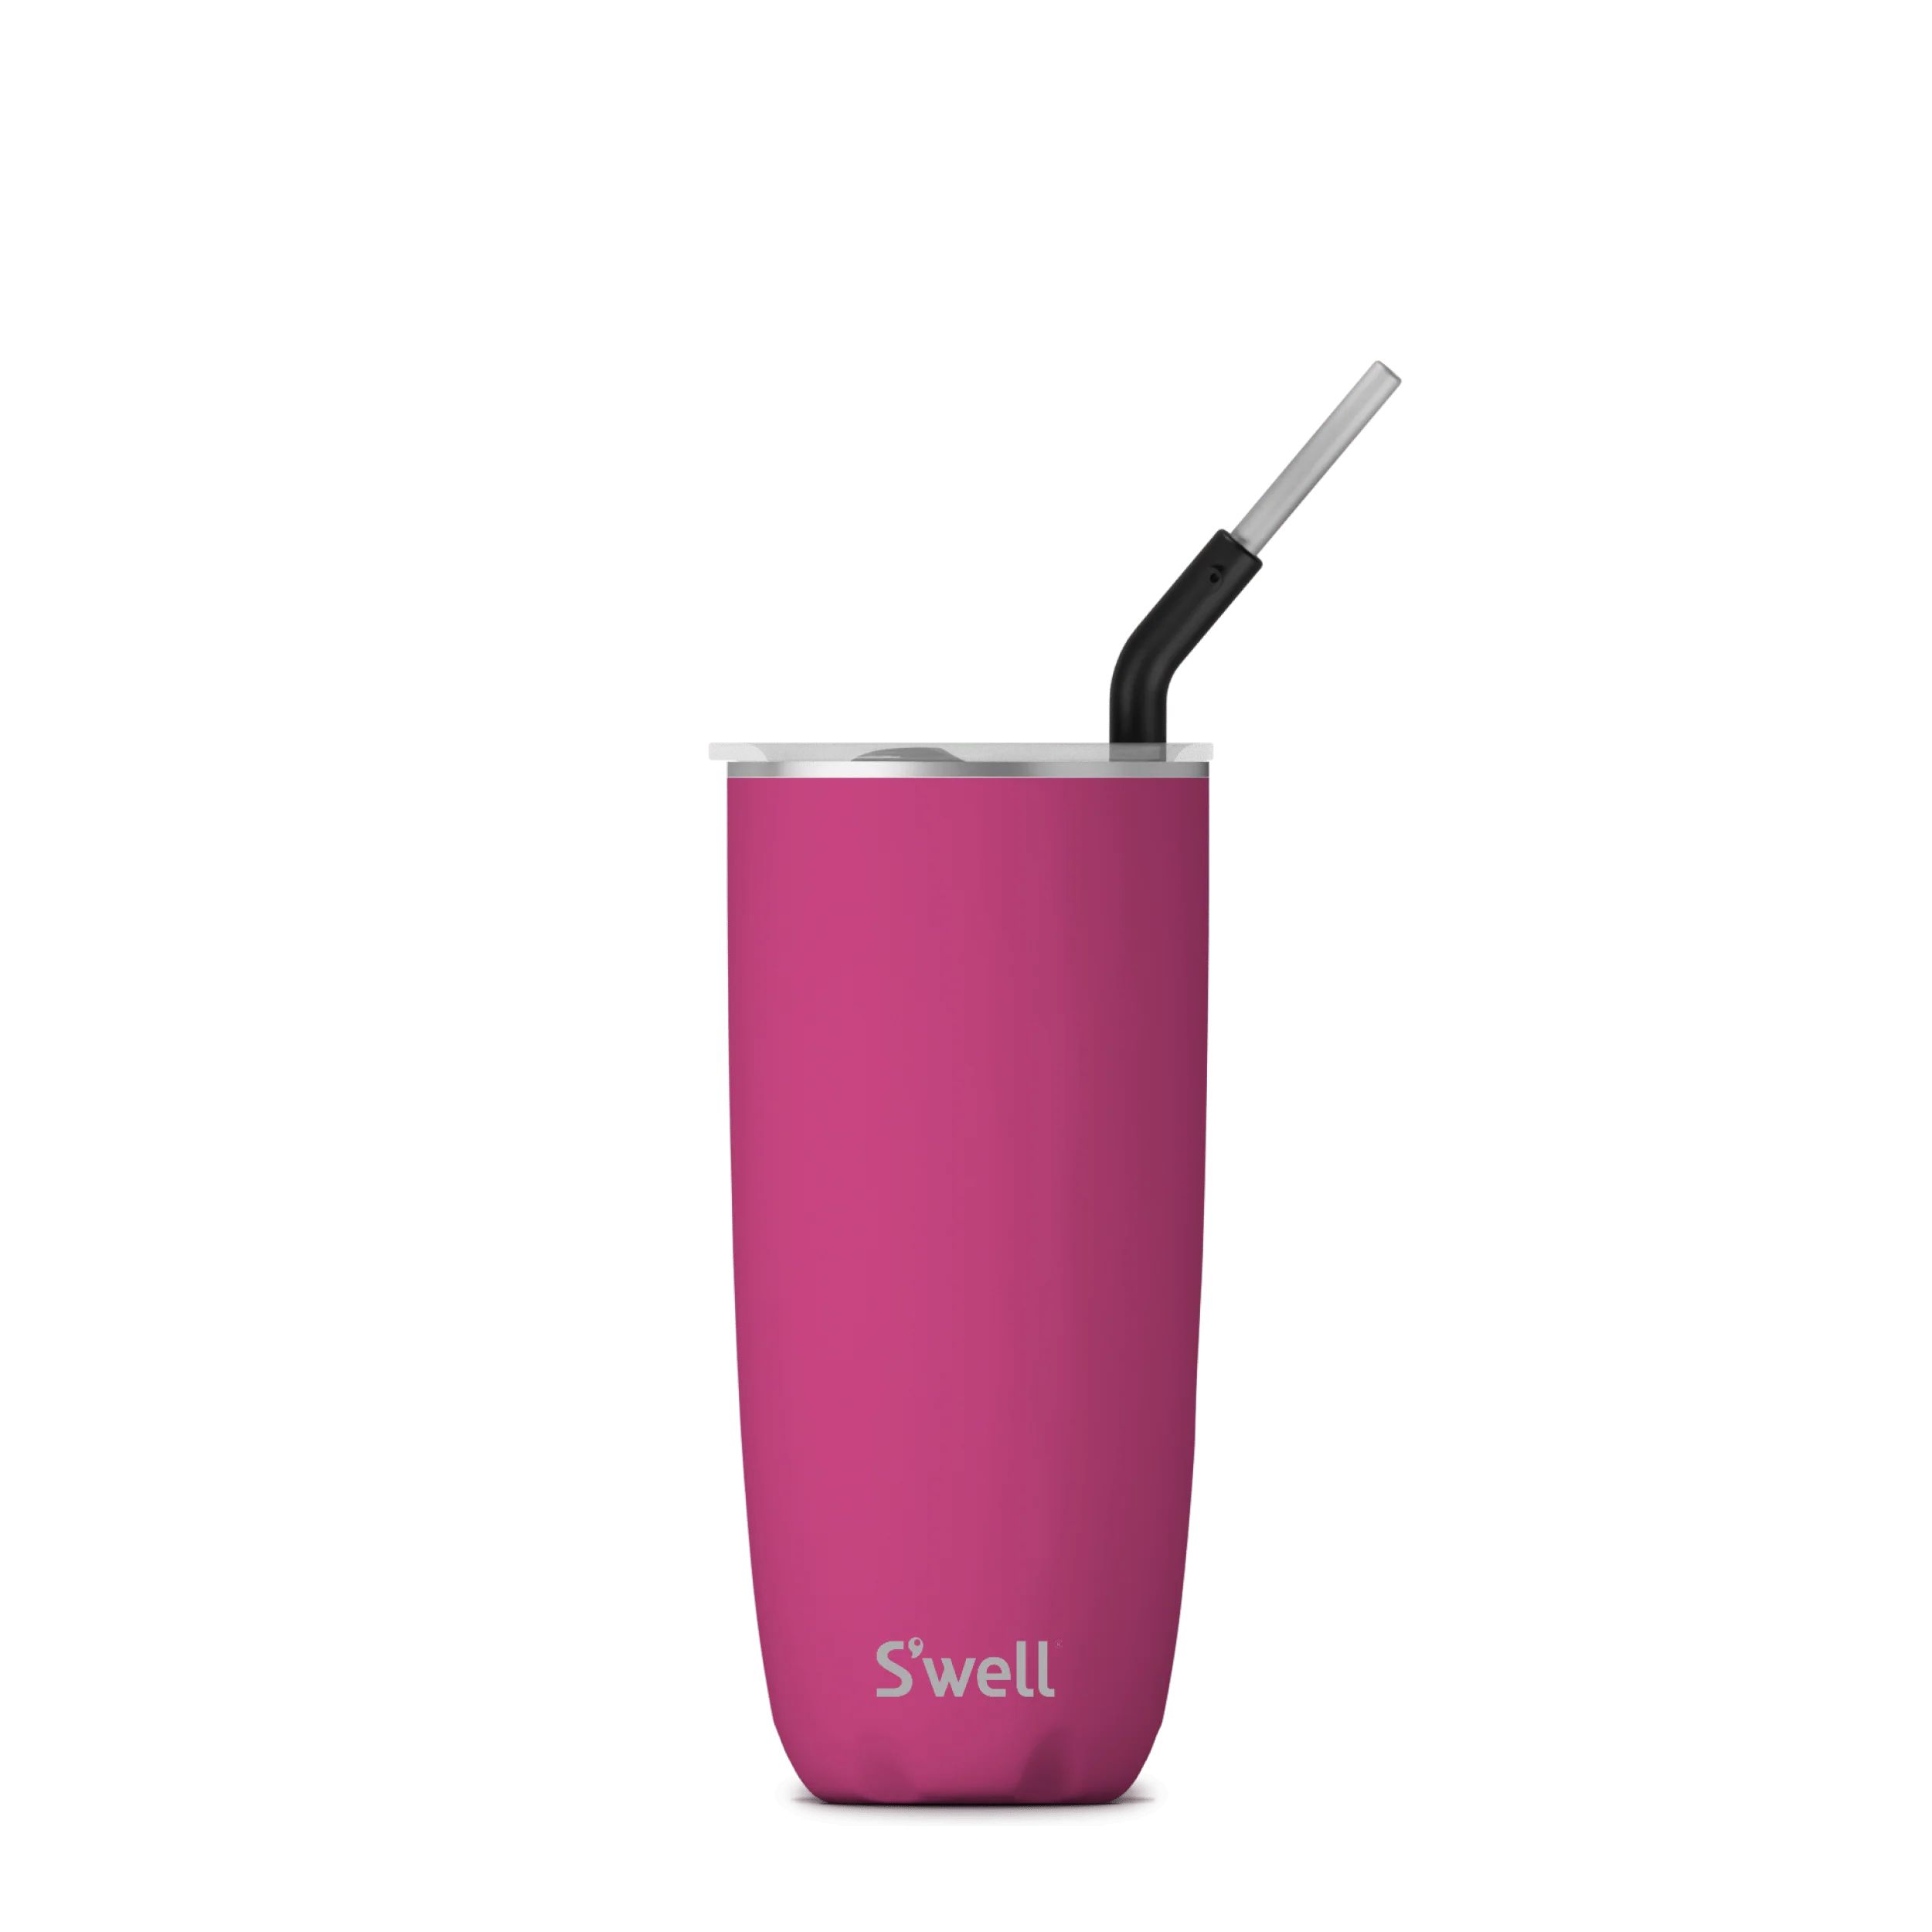 Tumbler with Straw | 24oz | S'well